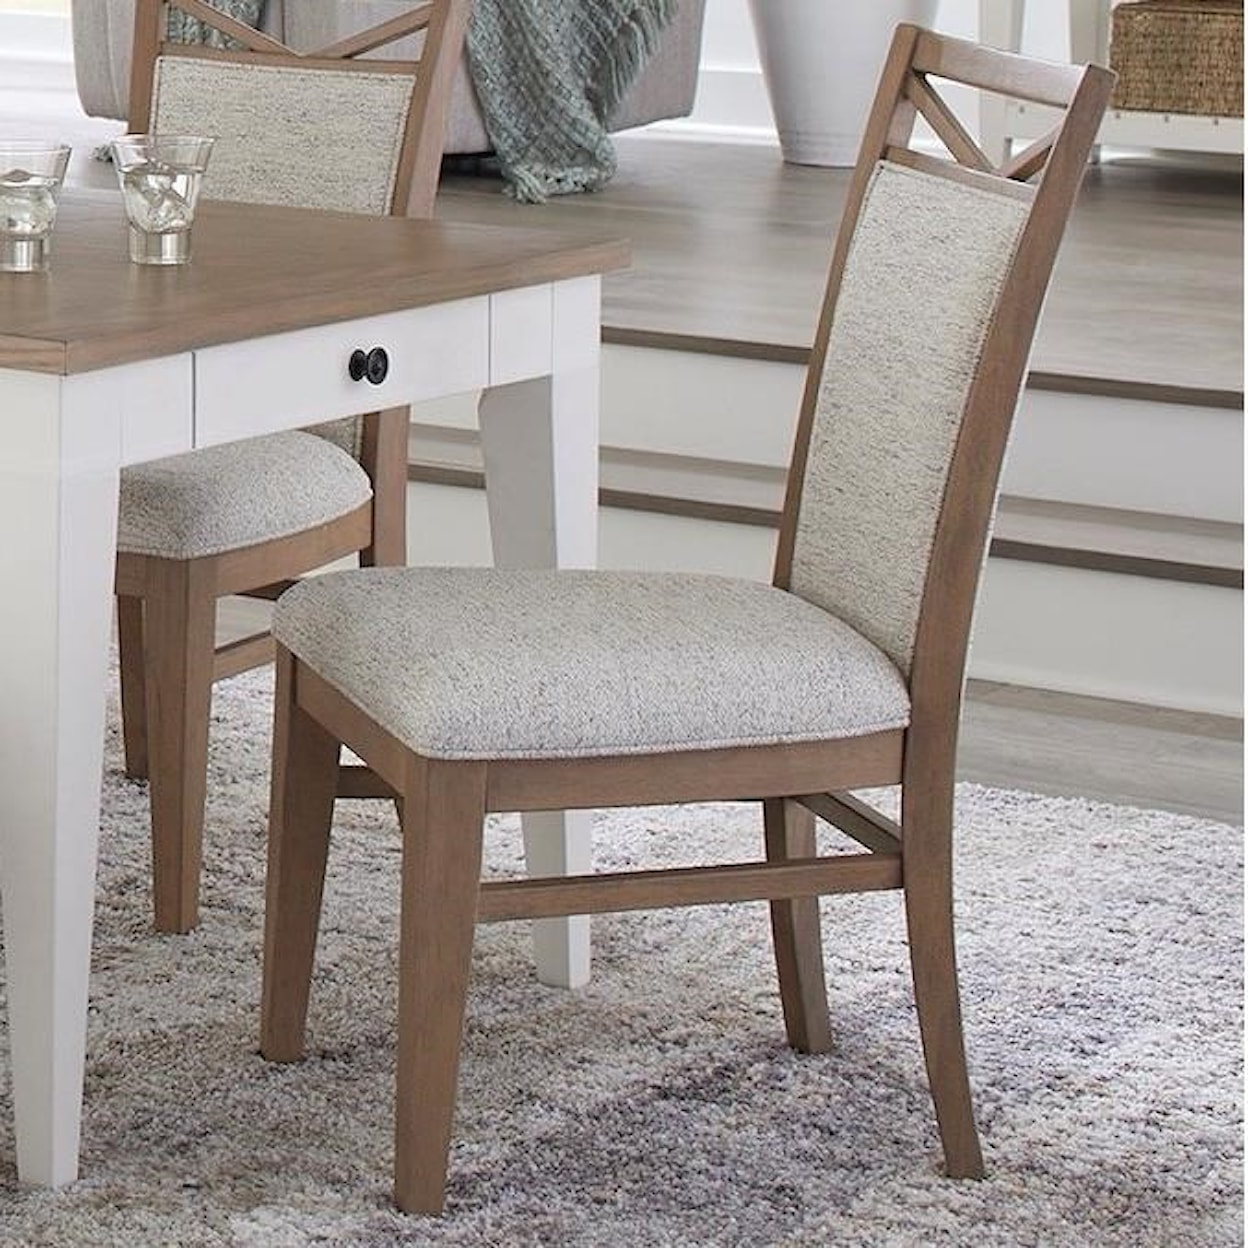 Parker House Americana Modern Dining Chair Upholstered